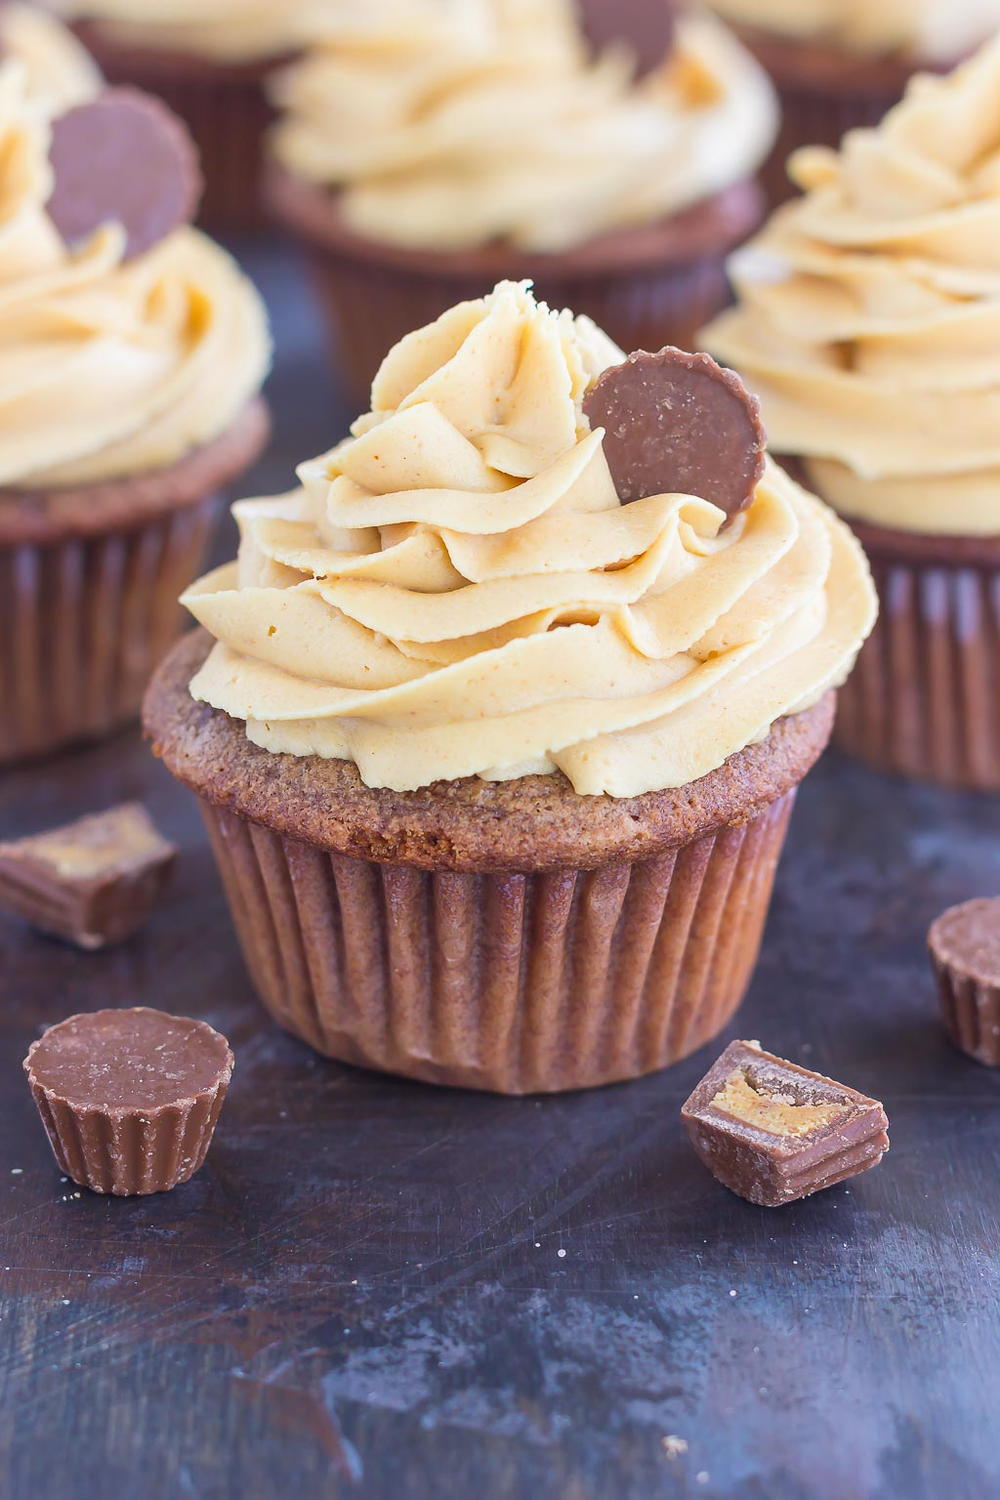 Chocolate Cupcake with Peanut Butter Frosting | FaveSouthernRecipes.com